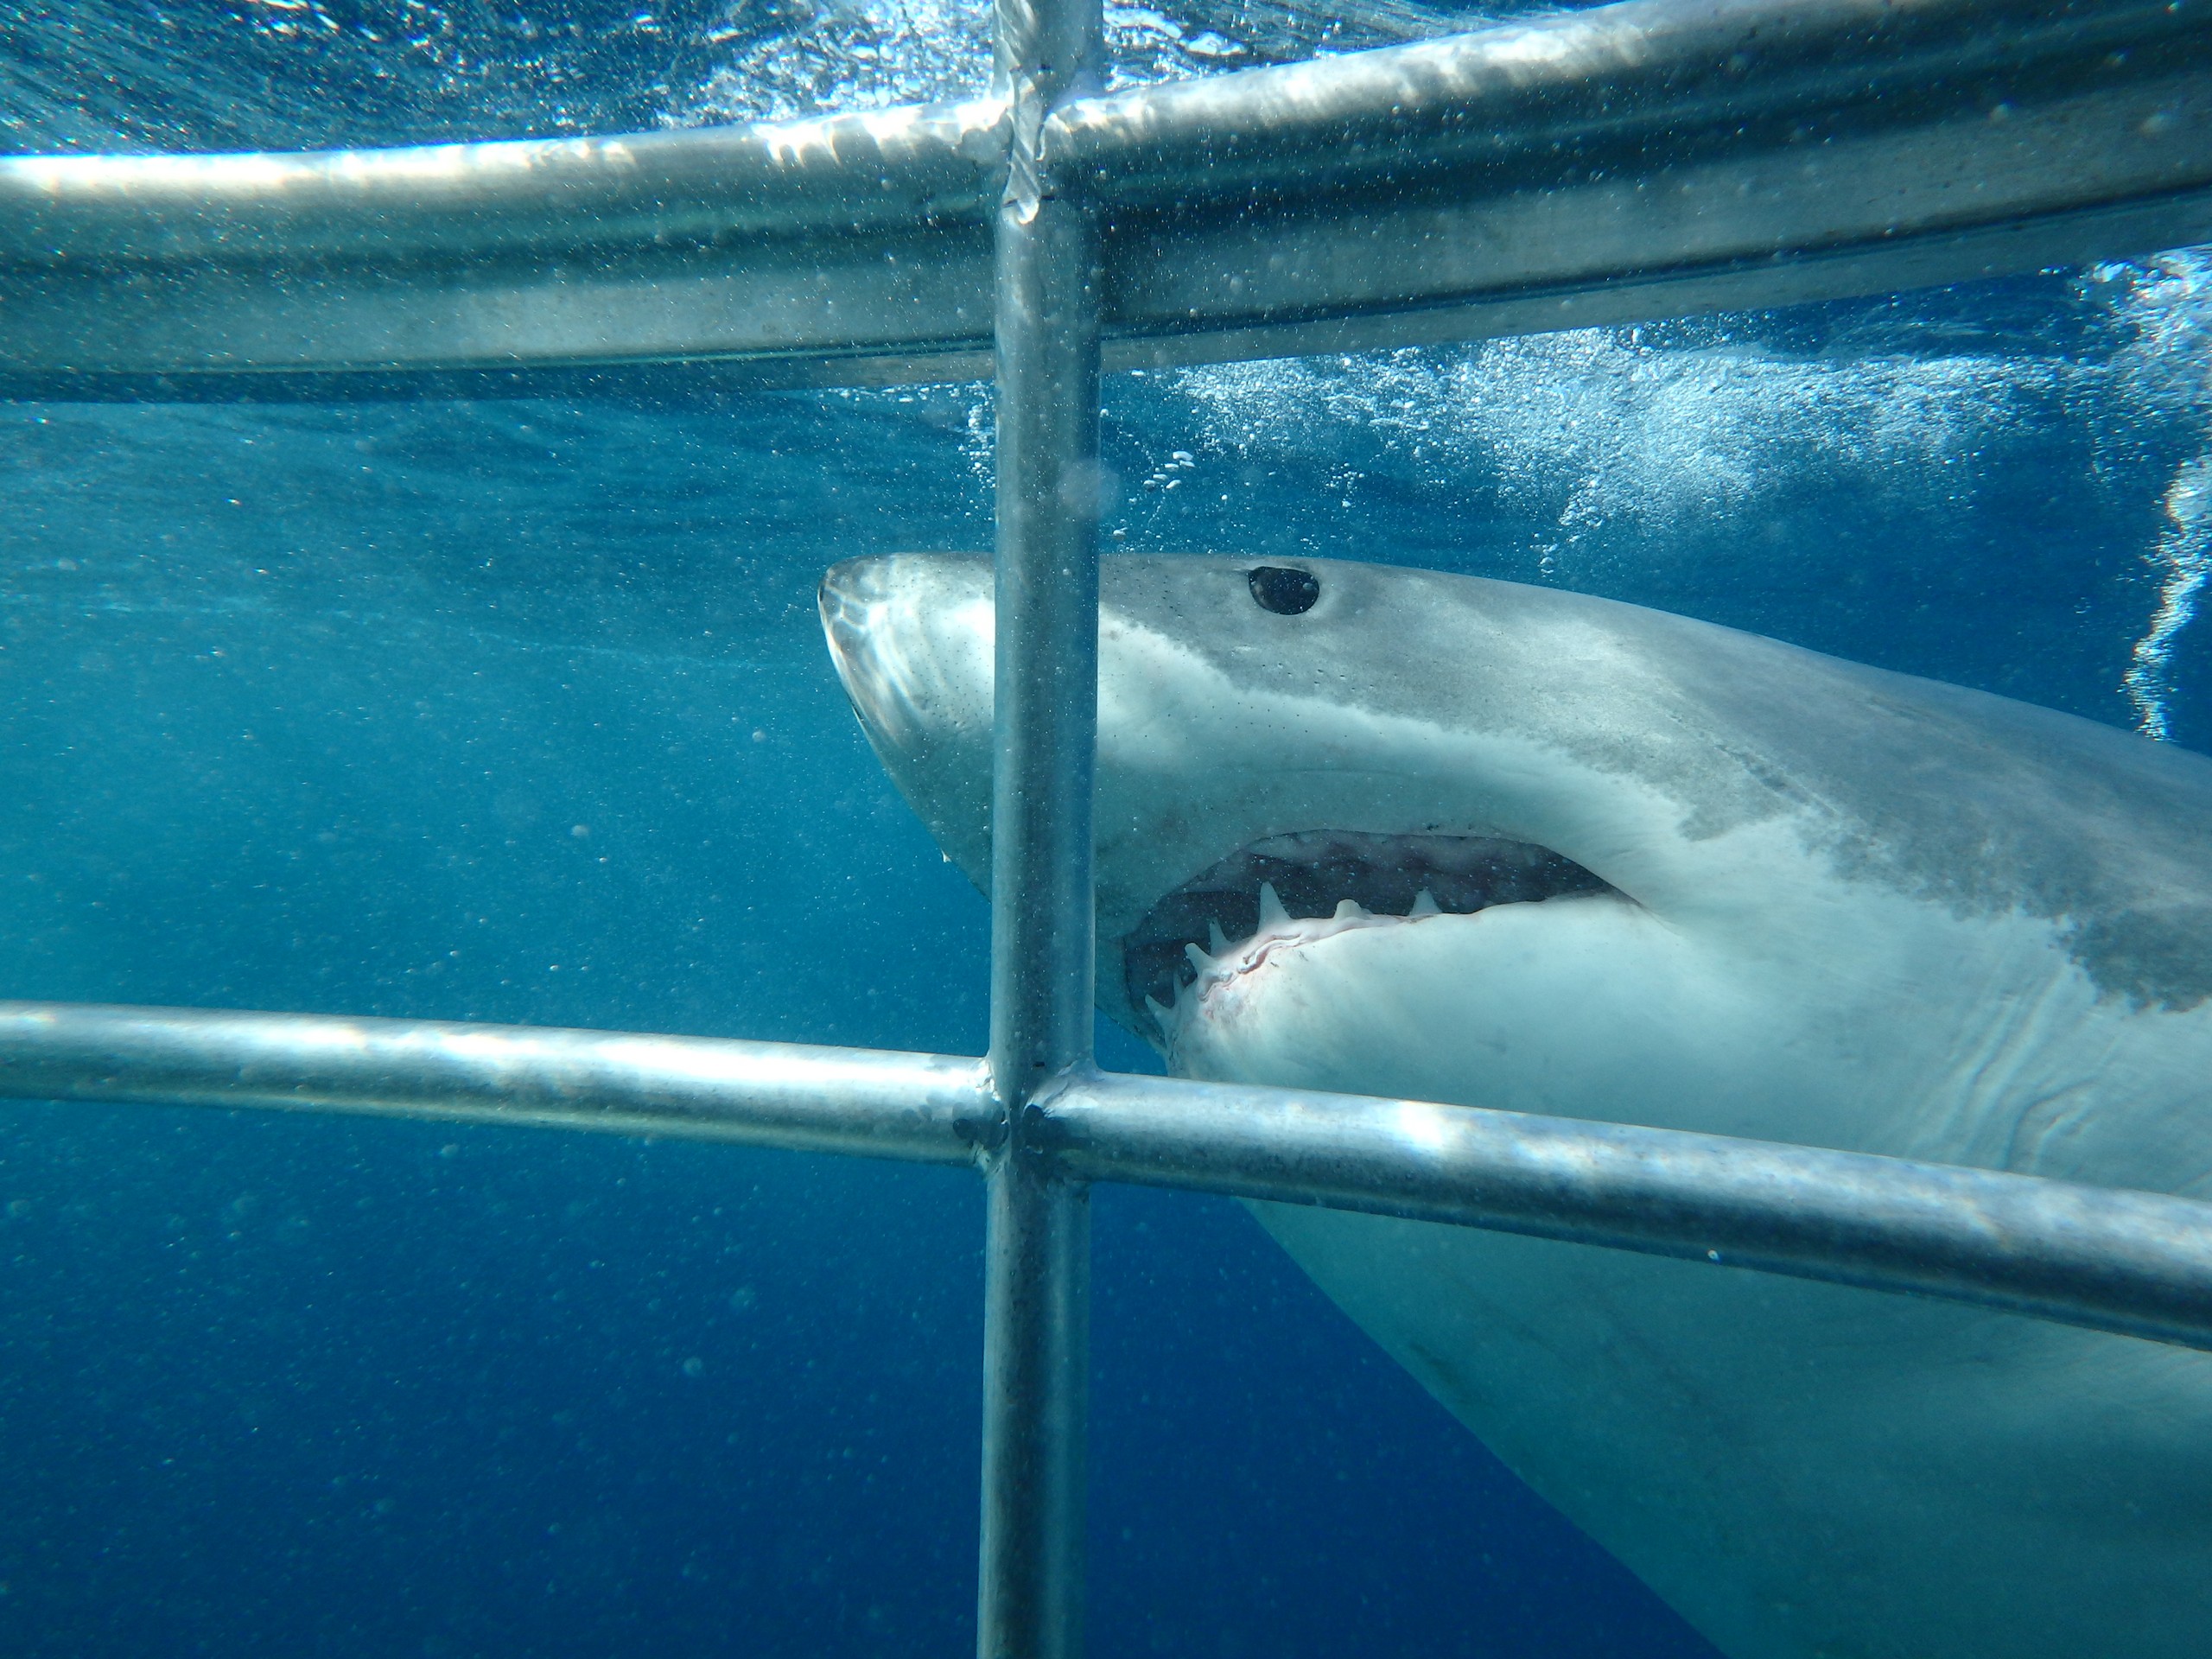 Great white shark met underwater, while cage diving